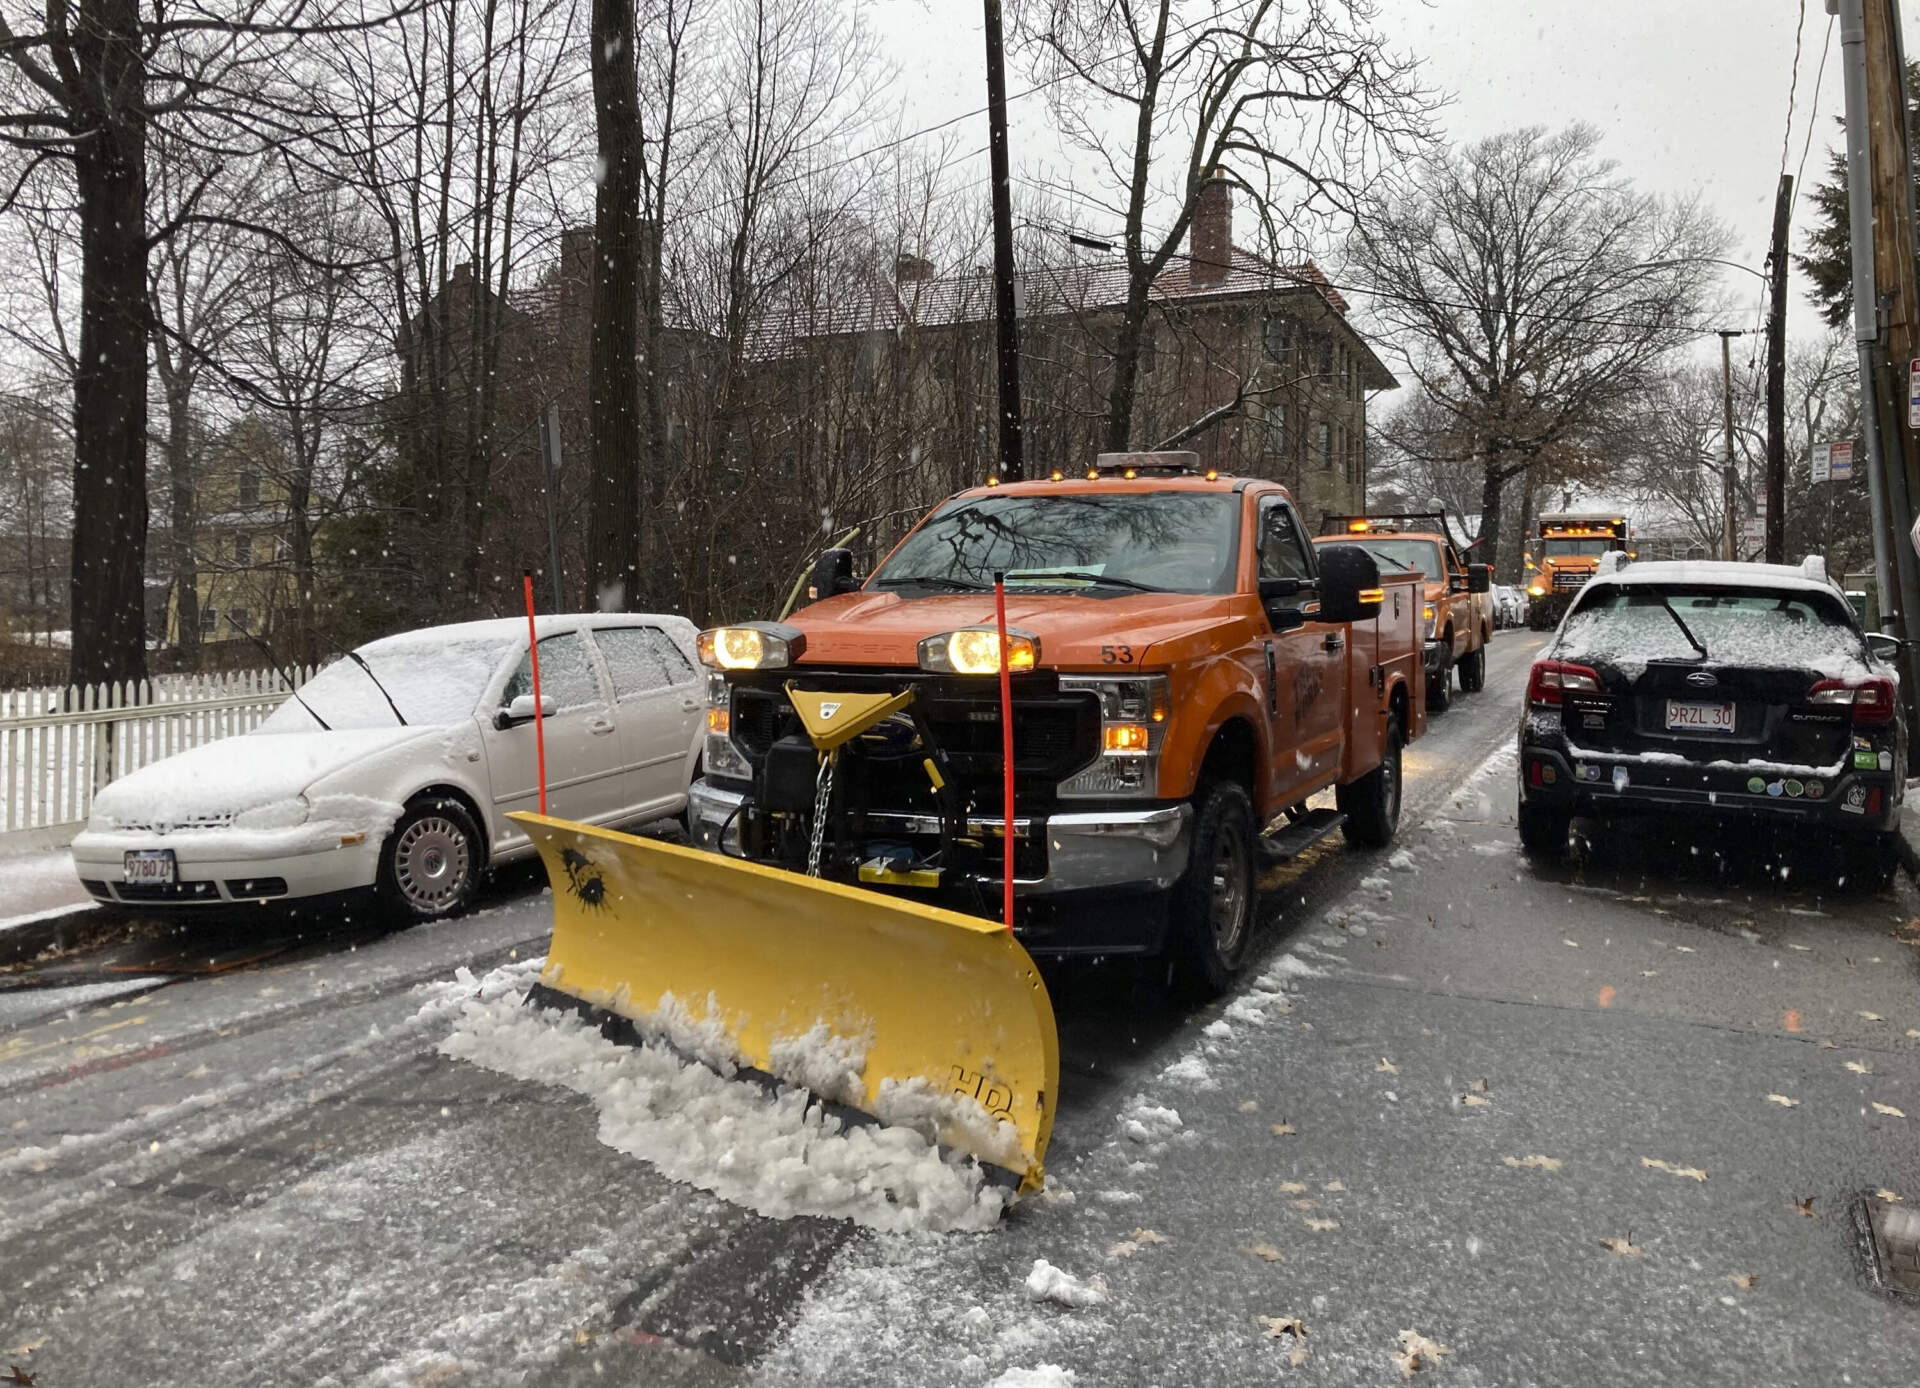 A plow clears snow and slush from sidewalks Sunday in Cambridge, Mass. as a storm bringing a wintry mix of precipitation bears down on the New England region. (Steve LeBlanc/AP)